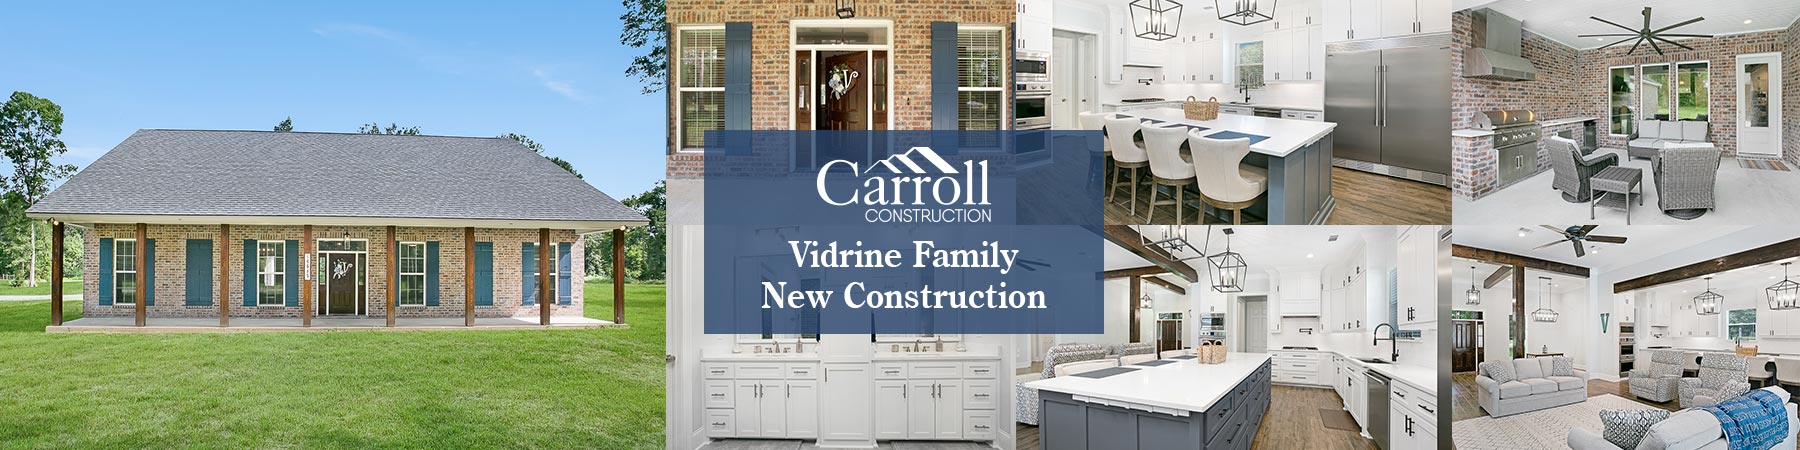 New Construction for the Vidrine Family Home